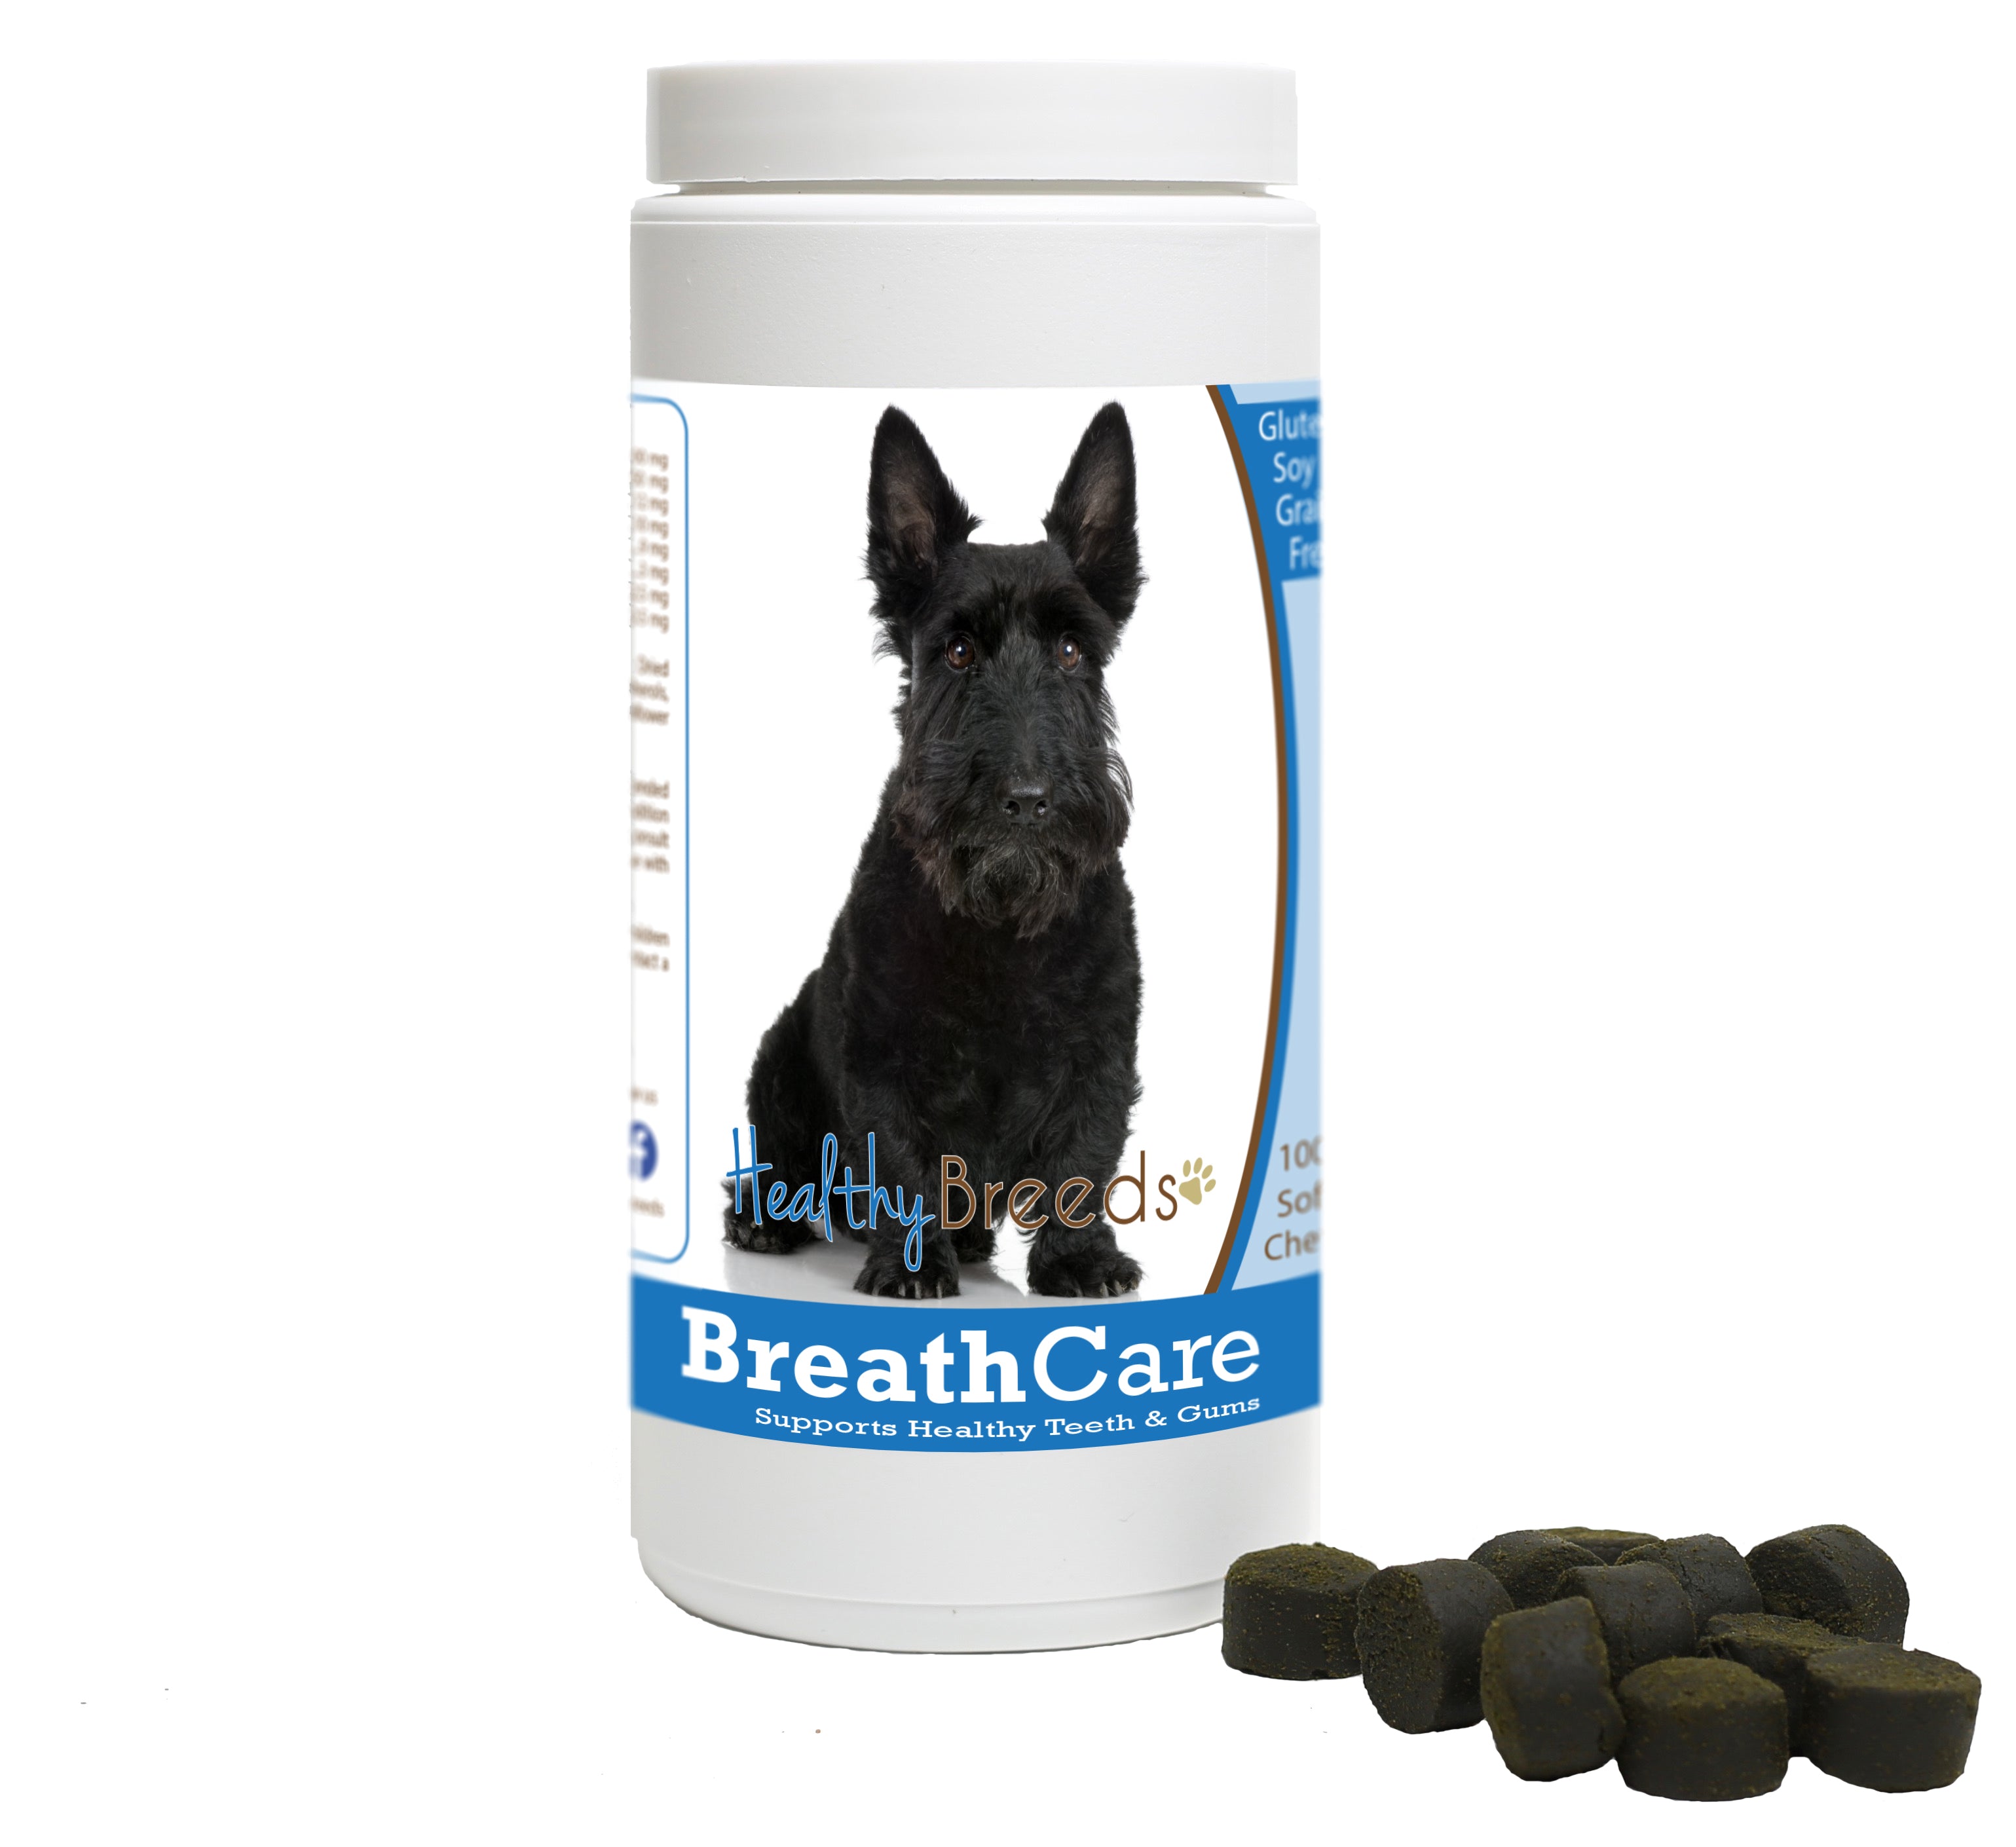 Scottish Terrier Breath Care Soft Chews for Dogs 60 Count